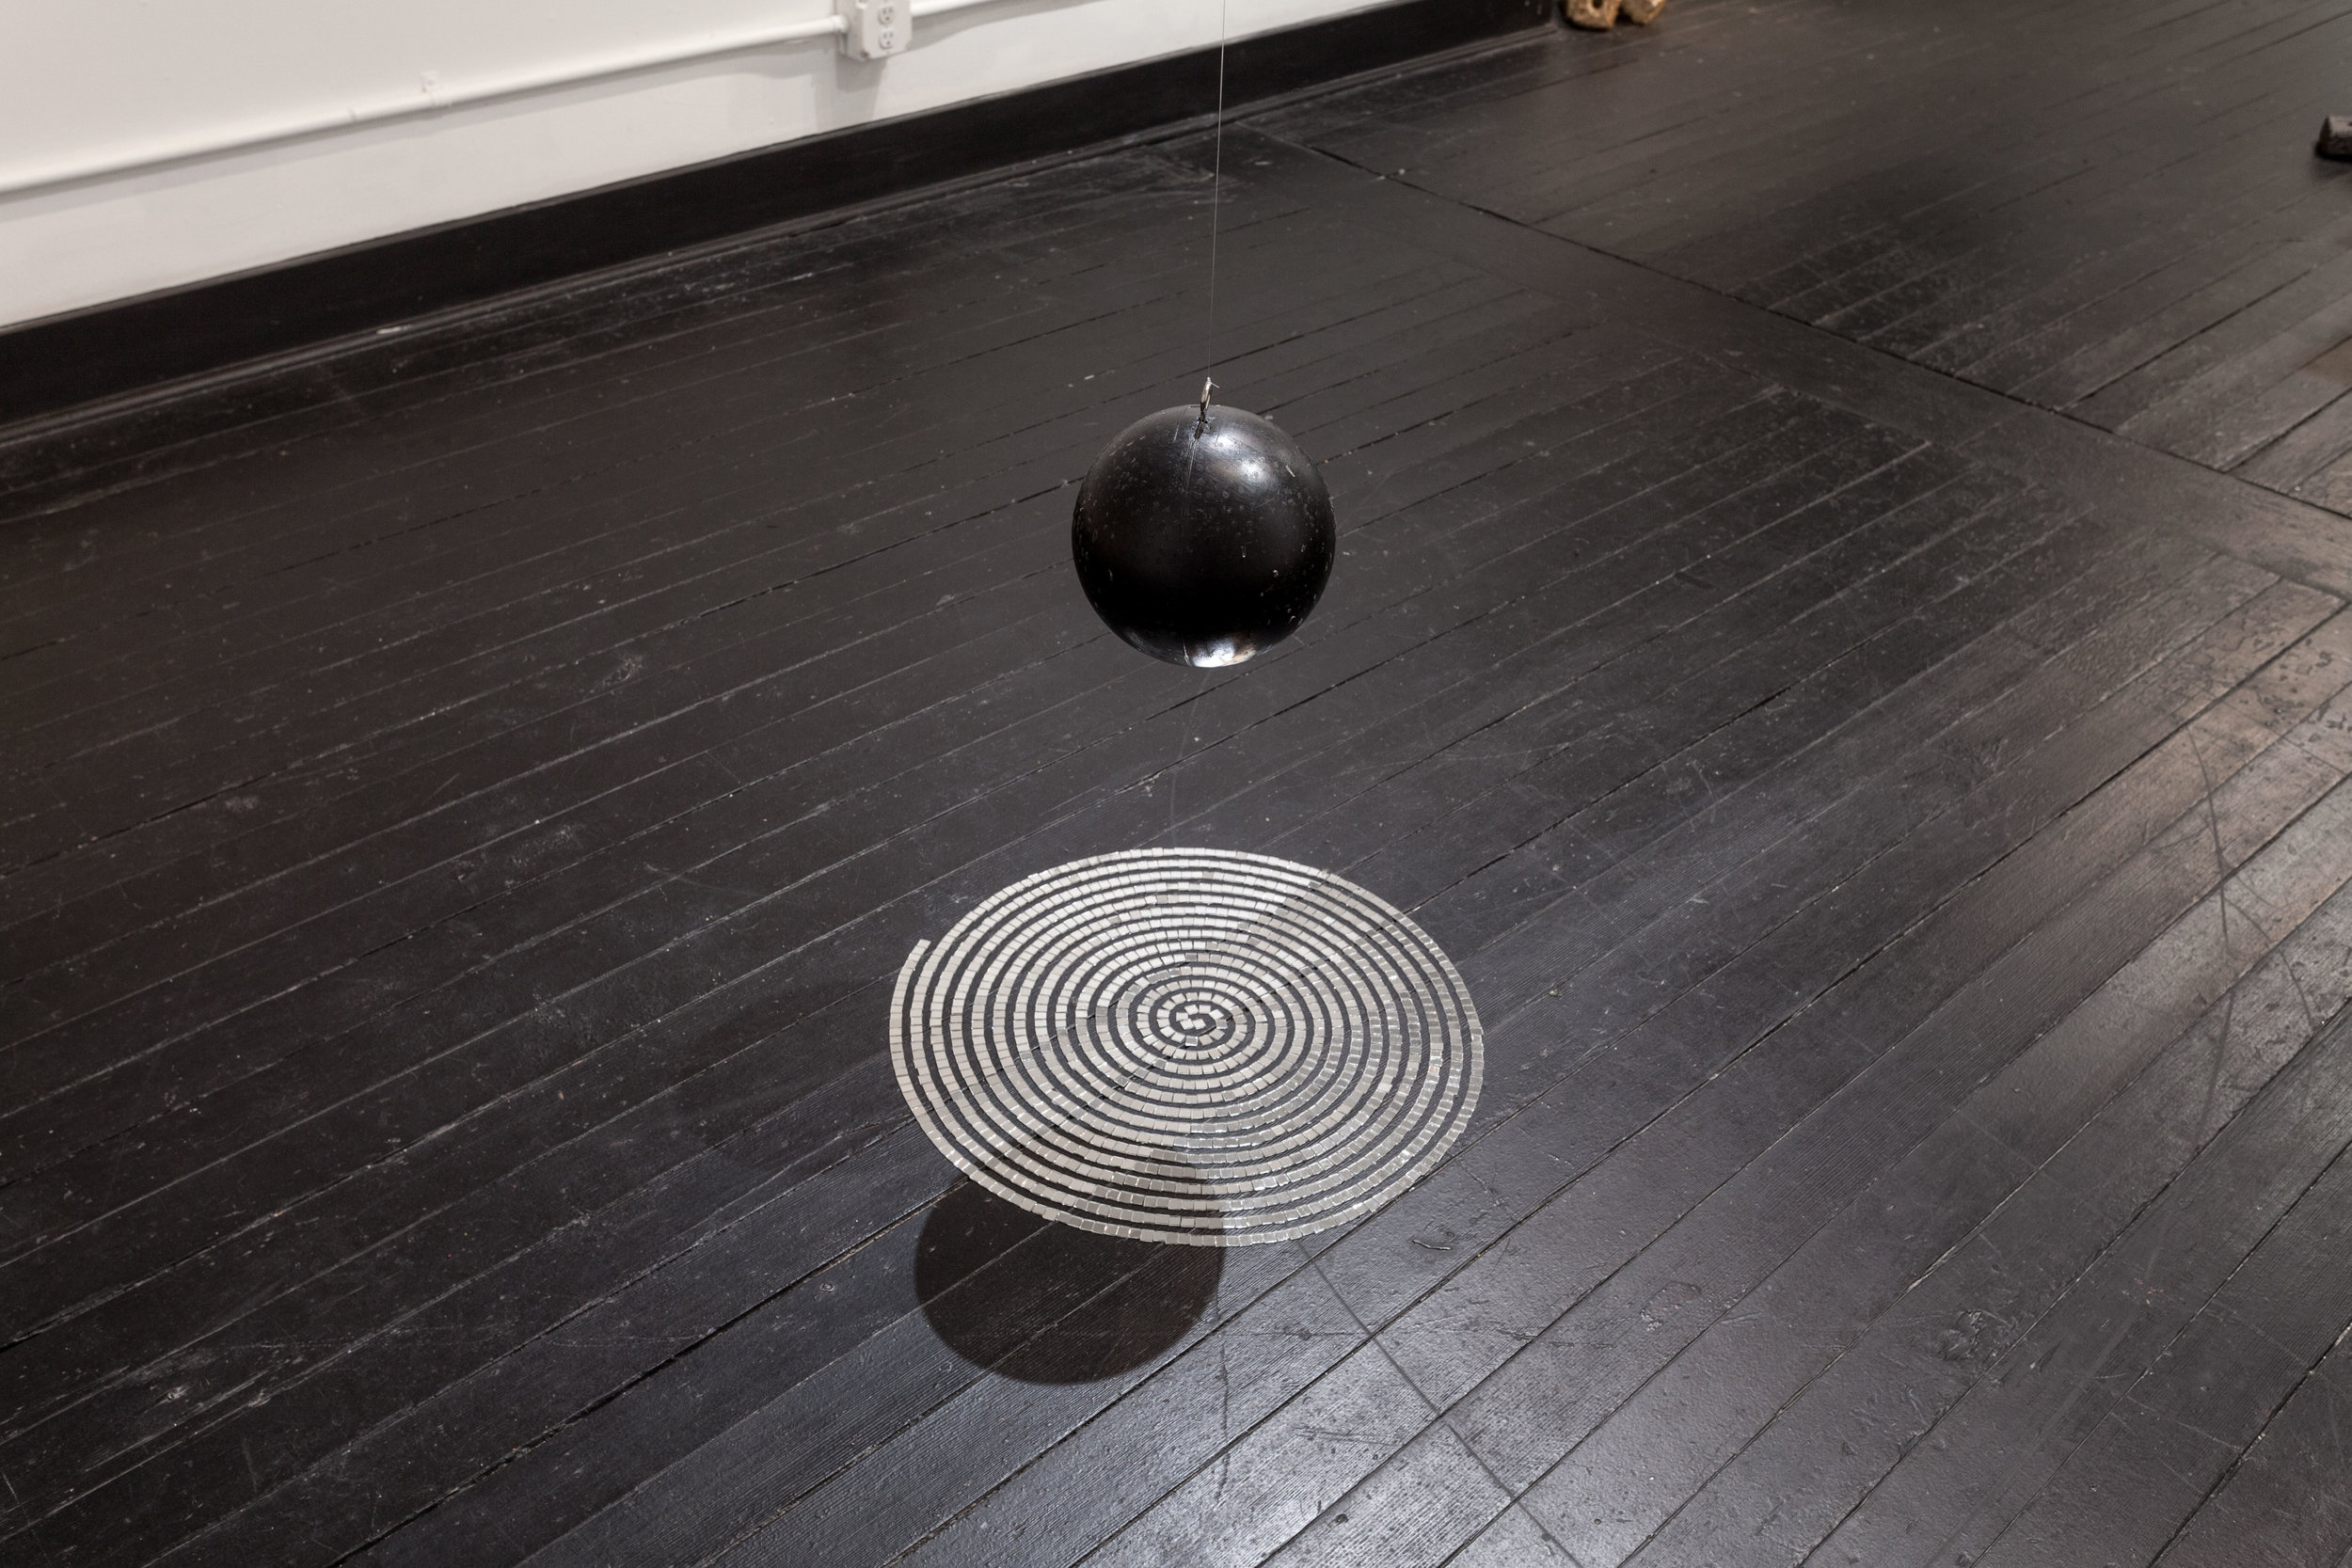 my boring patterns rippled and stared back, 2015, dismantled disco ball